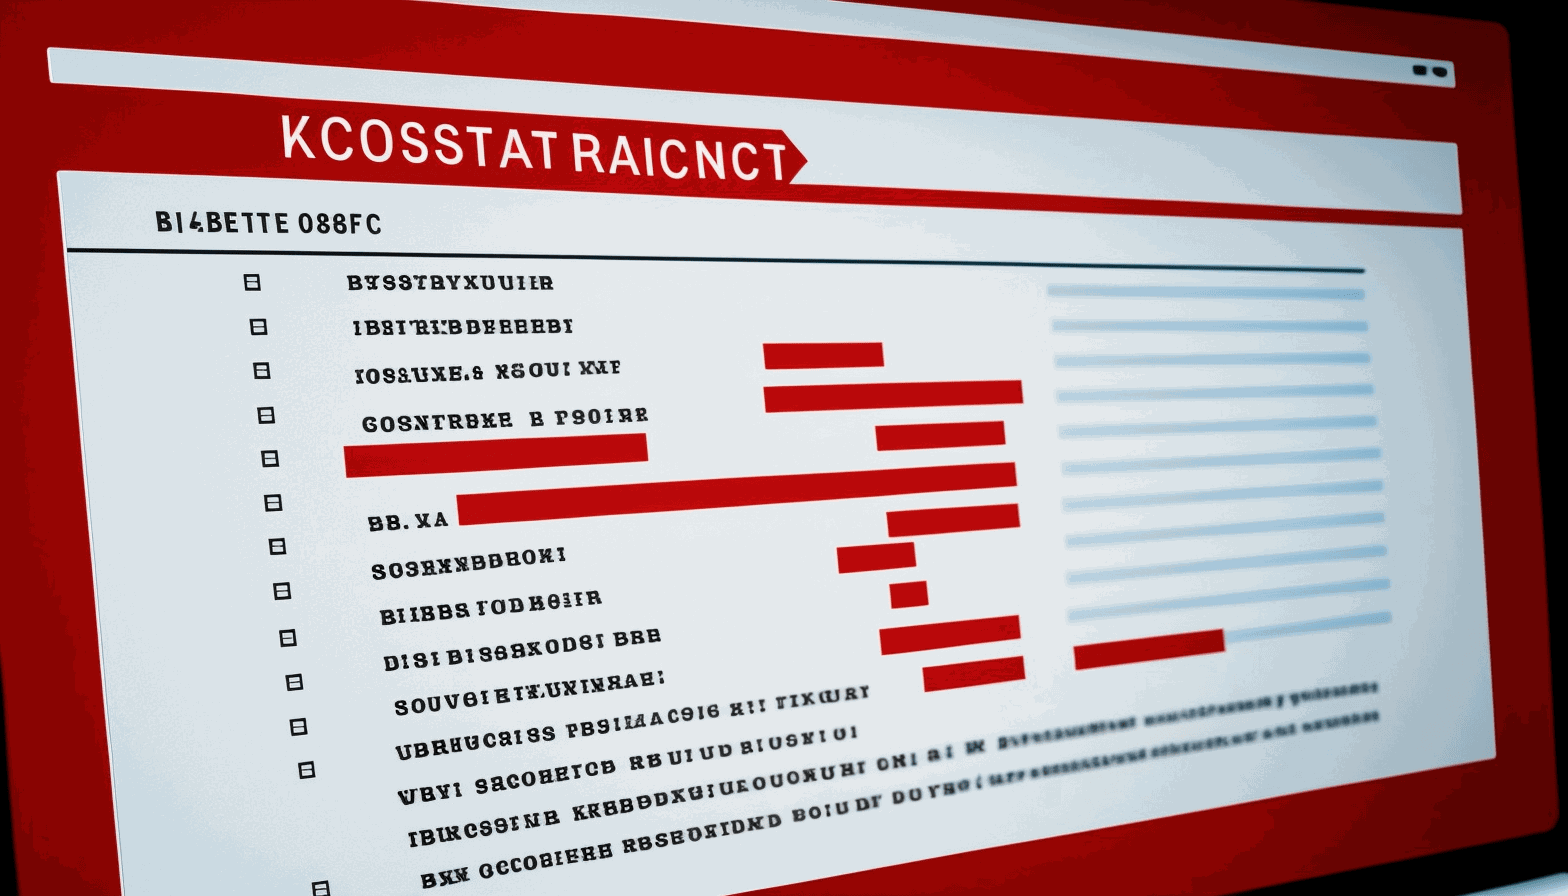 An image of a computer screen with a red X through a list of personal information, such as name, address, and phone number, symbolizing the removal of personal data from online directories.